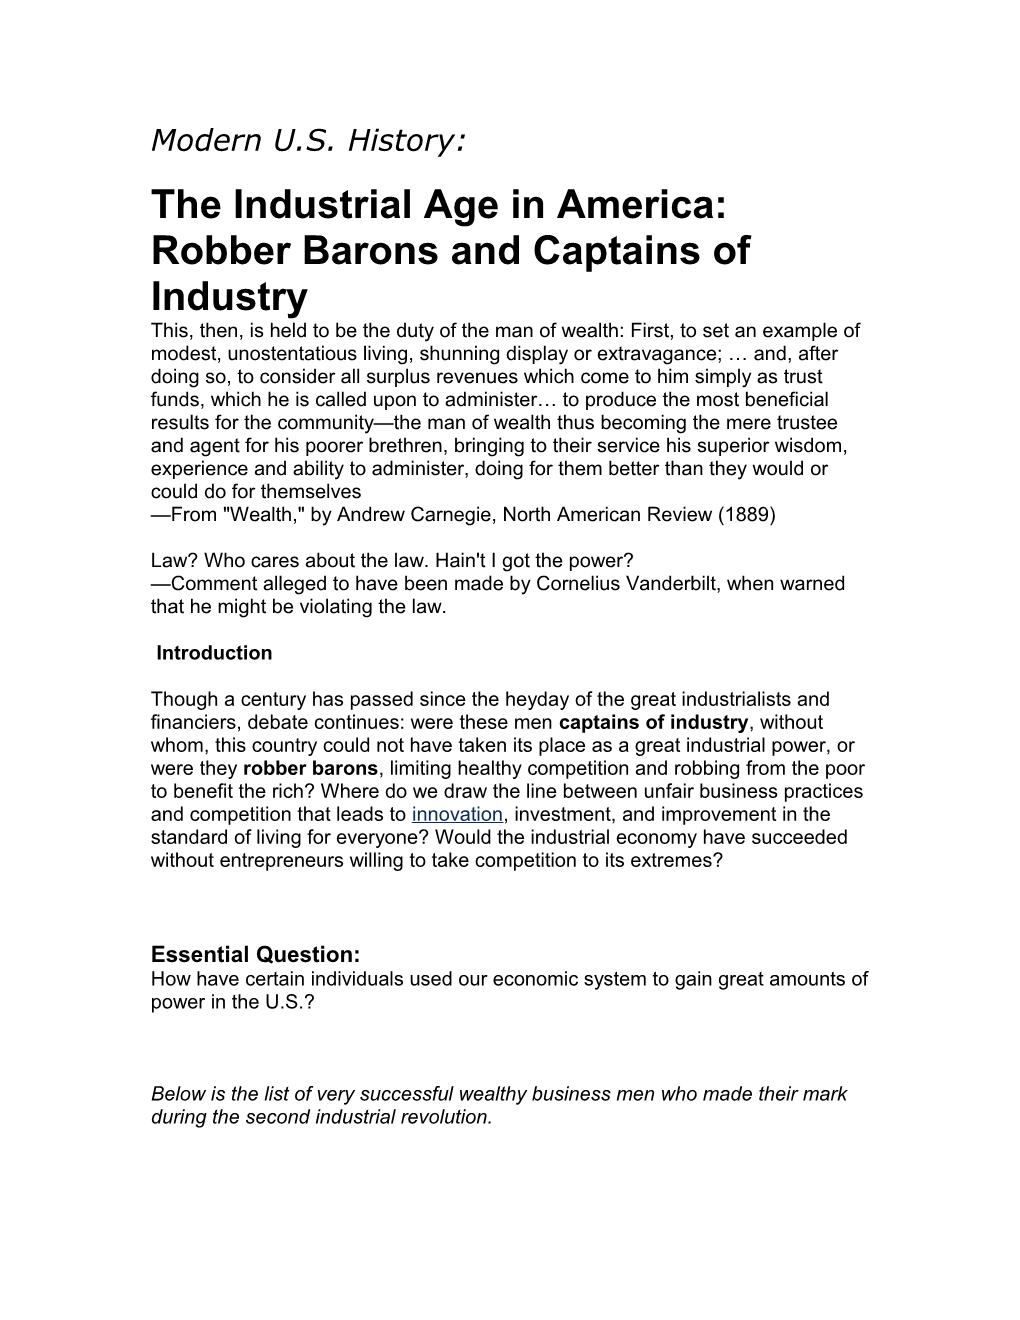 The Industrial Age in America: Robber Barons and Captains of Industry